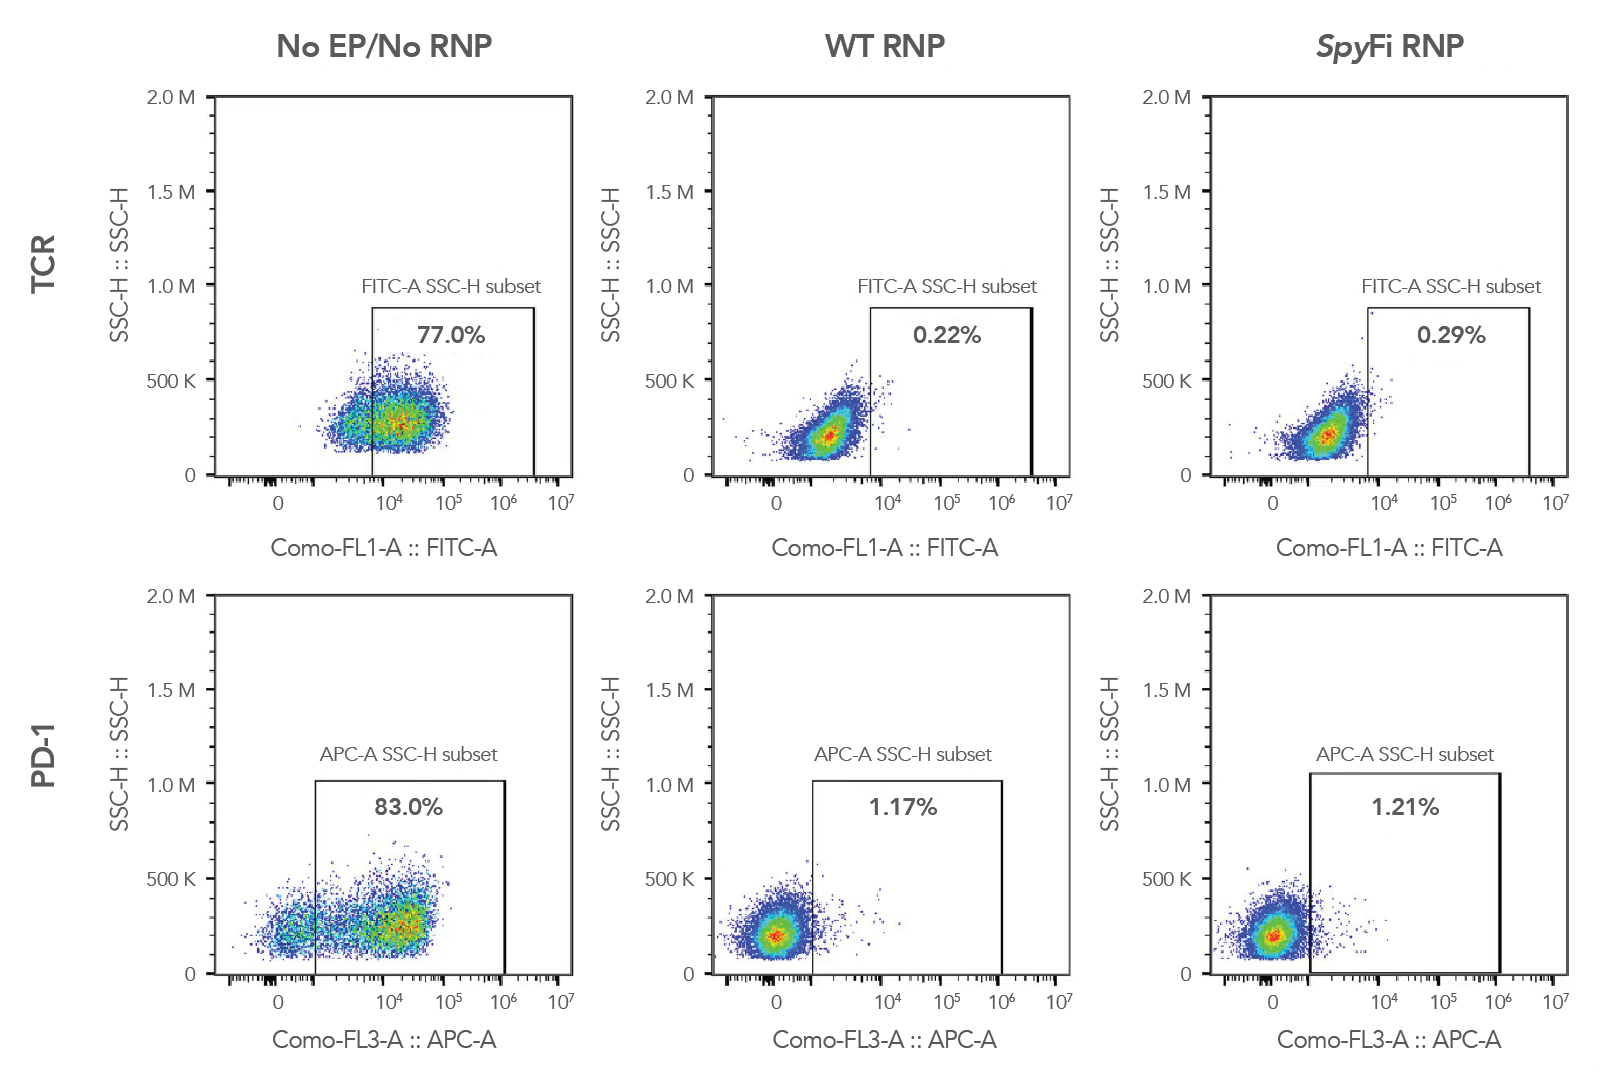 Flow cytometry results showing multiplexed knockout efficiency with wild type (WT) and SpyFi RNP